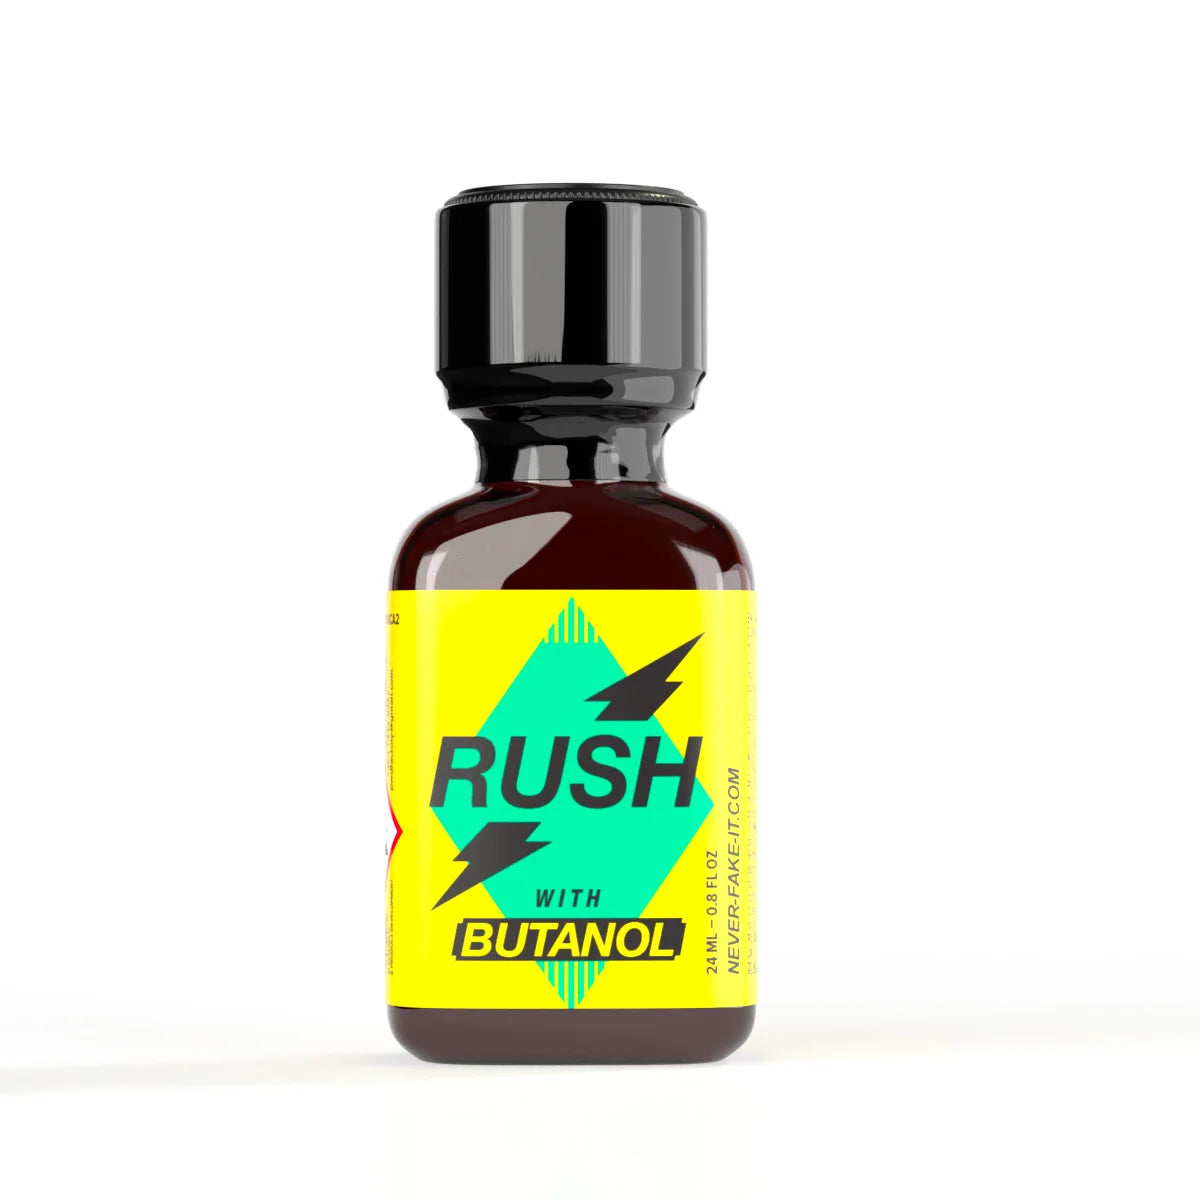 A product photo of Rush Butanol poppers.